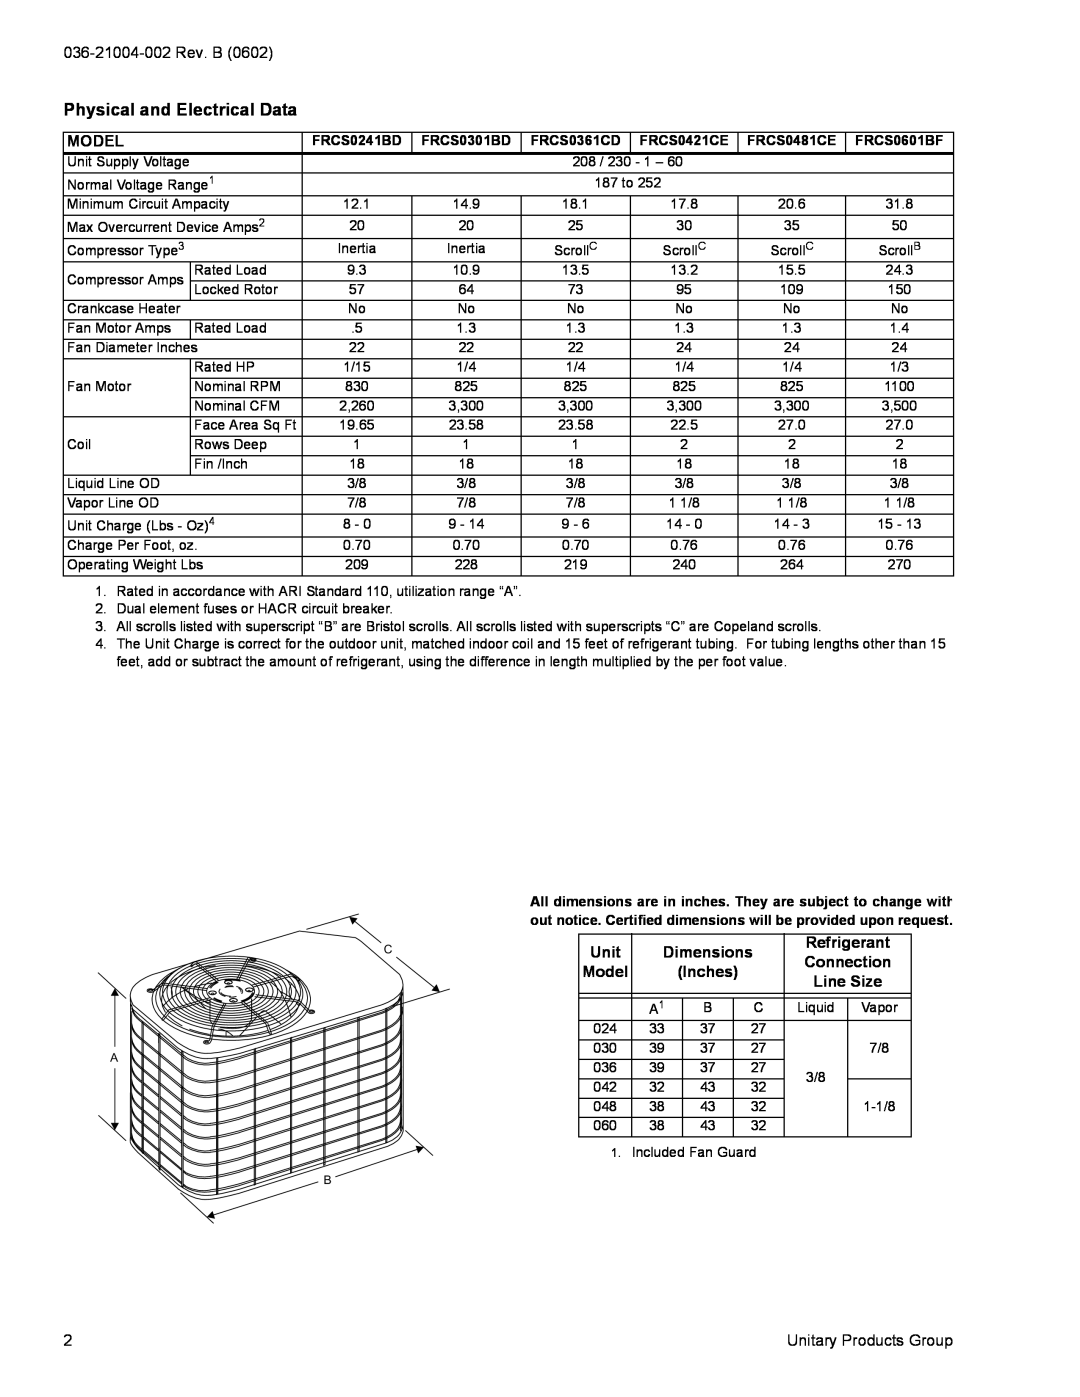 York FRCS024 warranty Physical and Electrical Data, Model, Unit, Dimensions, Refrigerant, Connection, Inches, Line Size 